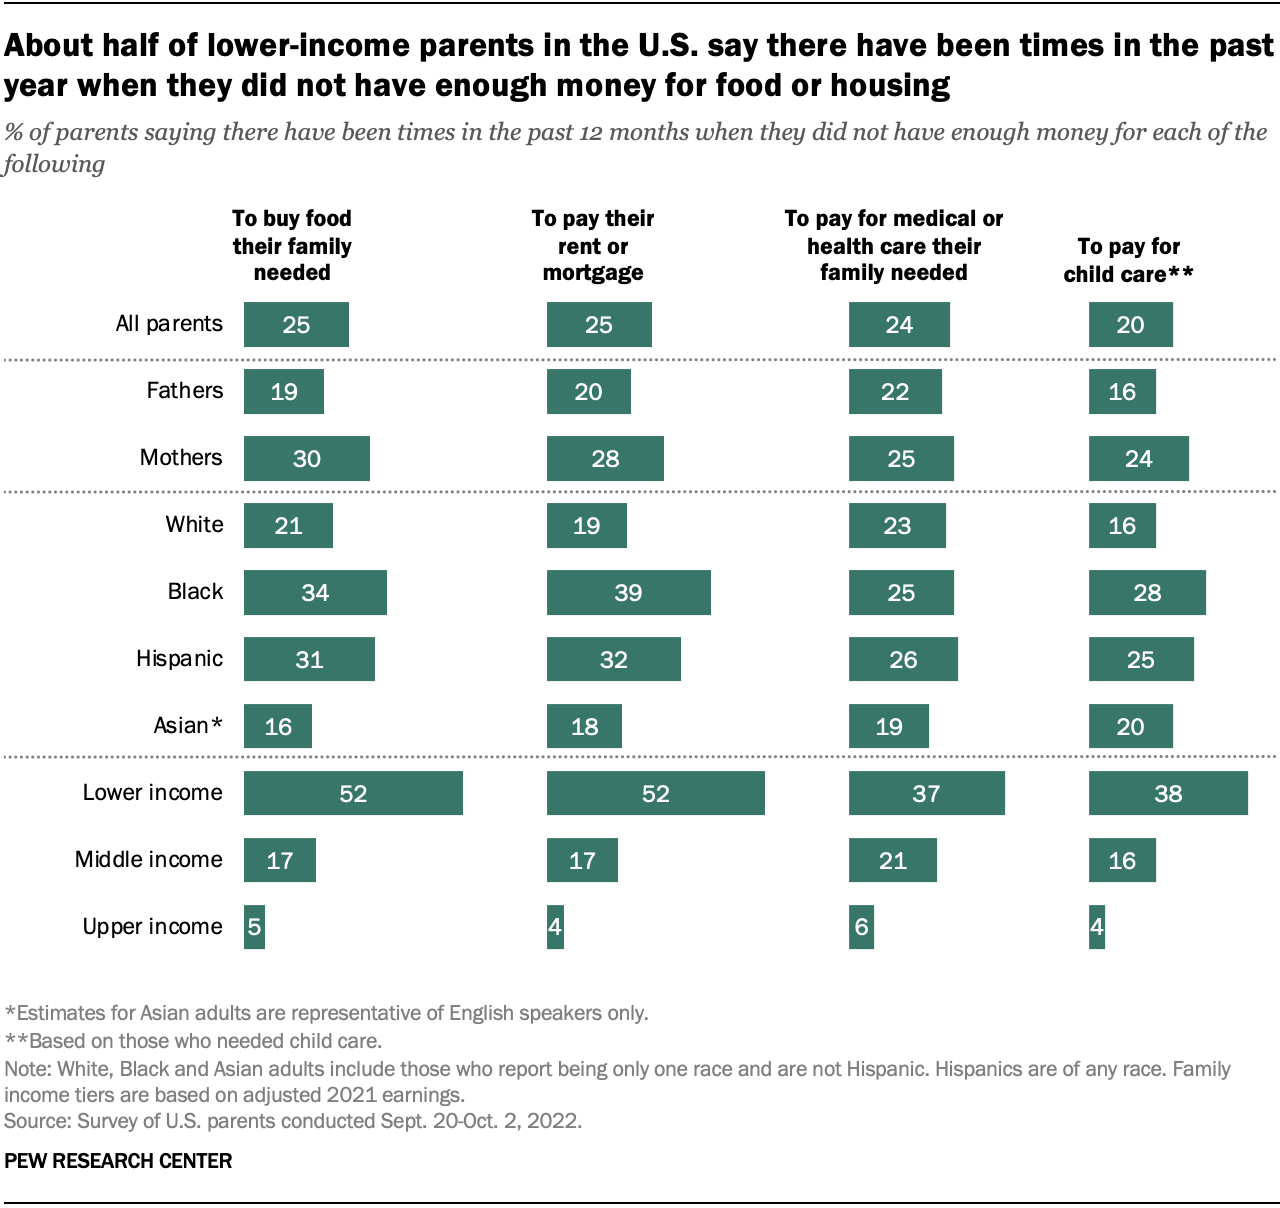 A bar chart showing that about half of lower-income parents in the U.S. say there have been times in the past year when they did not have enough money for food or housing